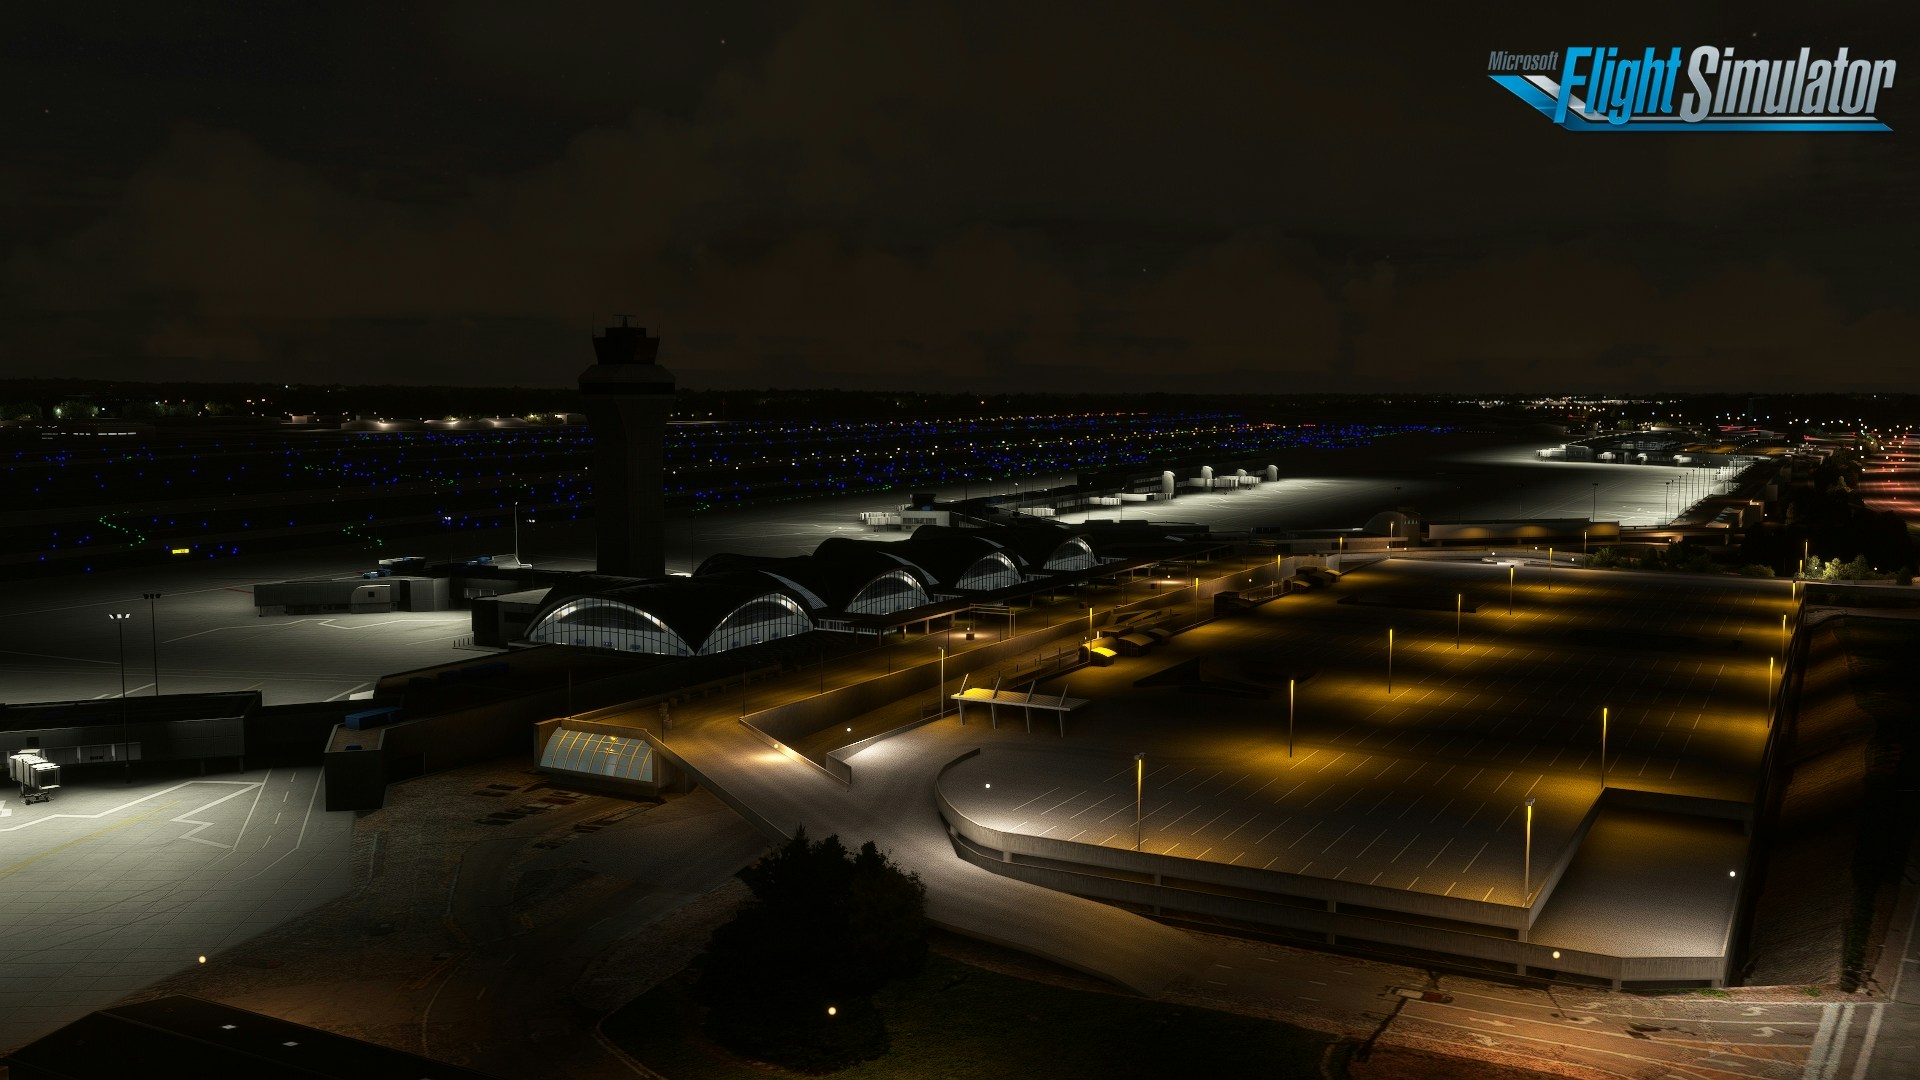 Feelthere Releases St. Louis Intl’ Airport for MSFS